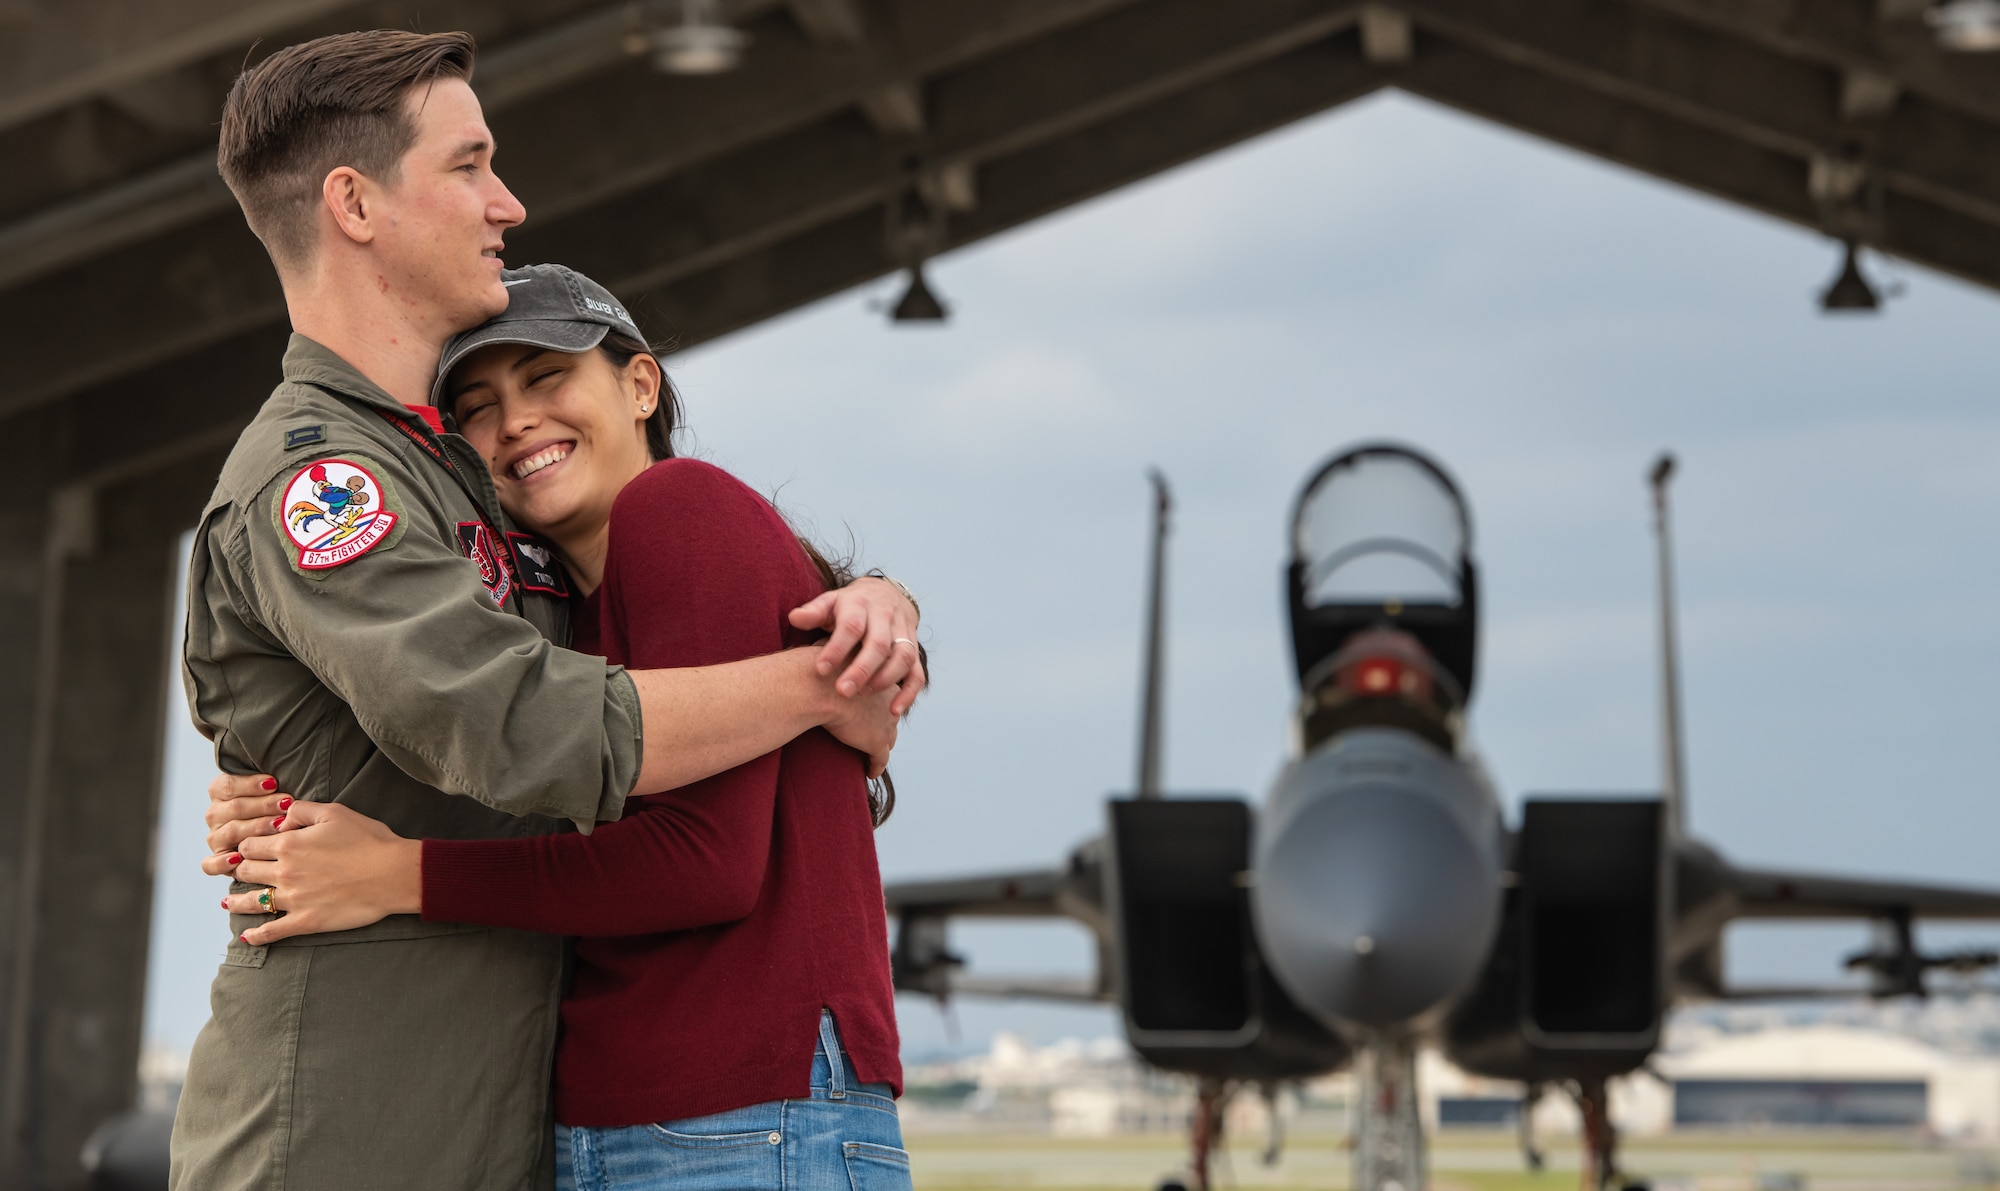 U.S. Air Force Capt. Cole Holloway a pilot from the 67th Fighter Squadron, hugs his wife, Meghan Holloway, Dec. 14, 2018, on Kadena Air Base, Japan.